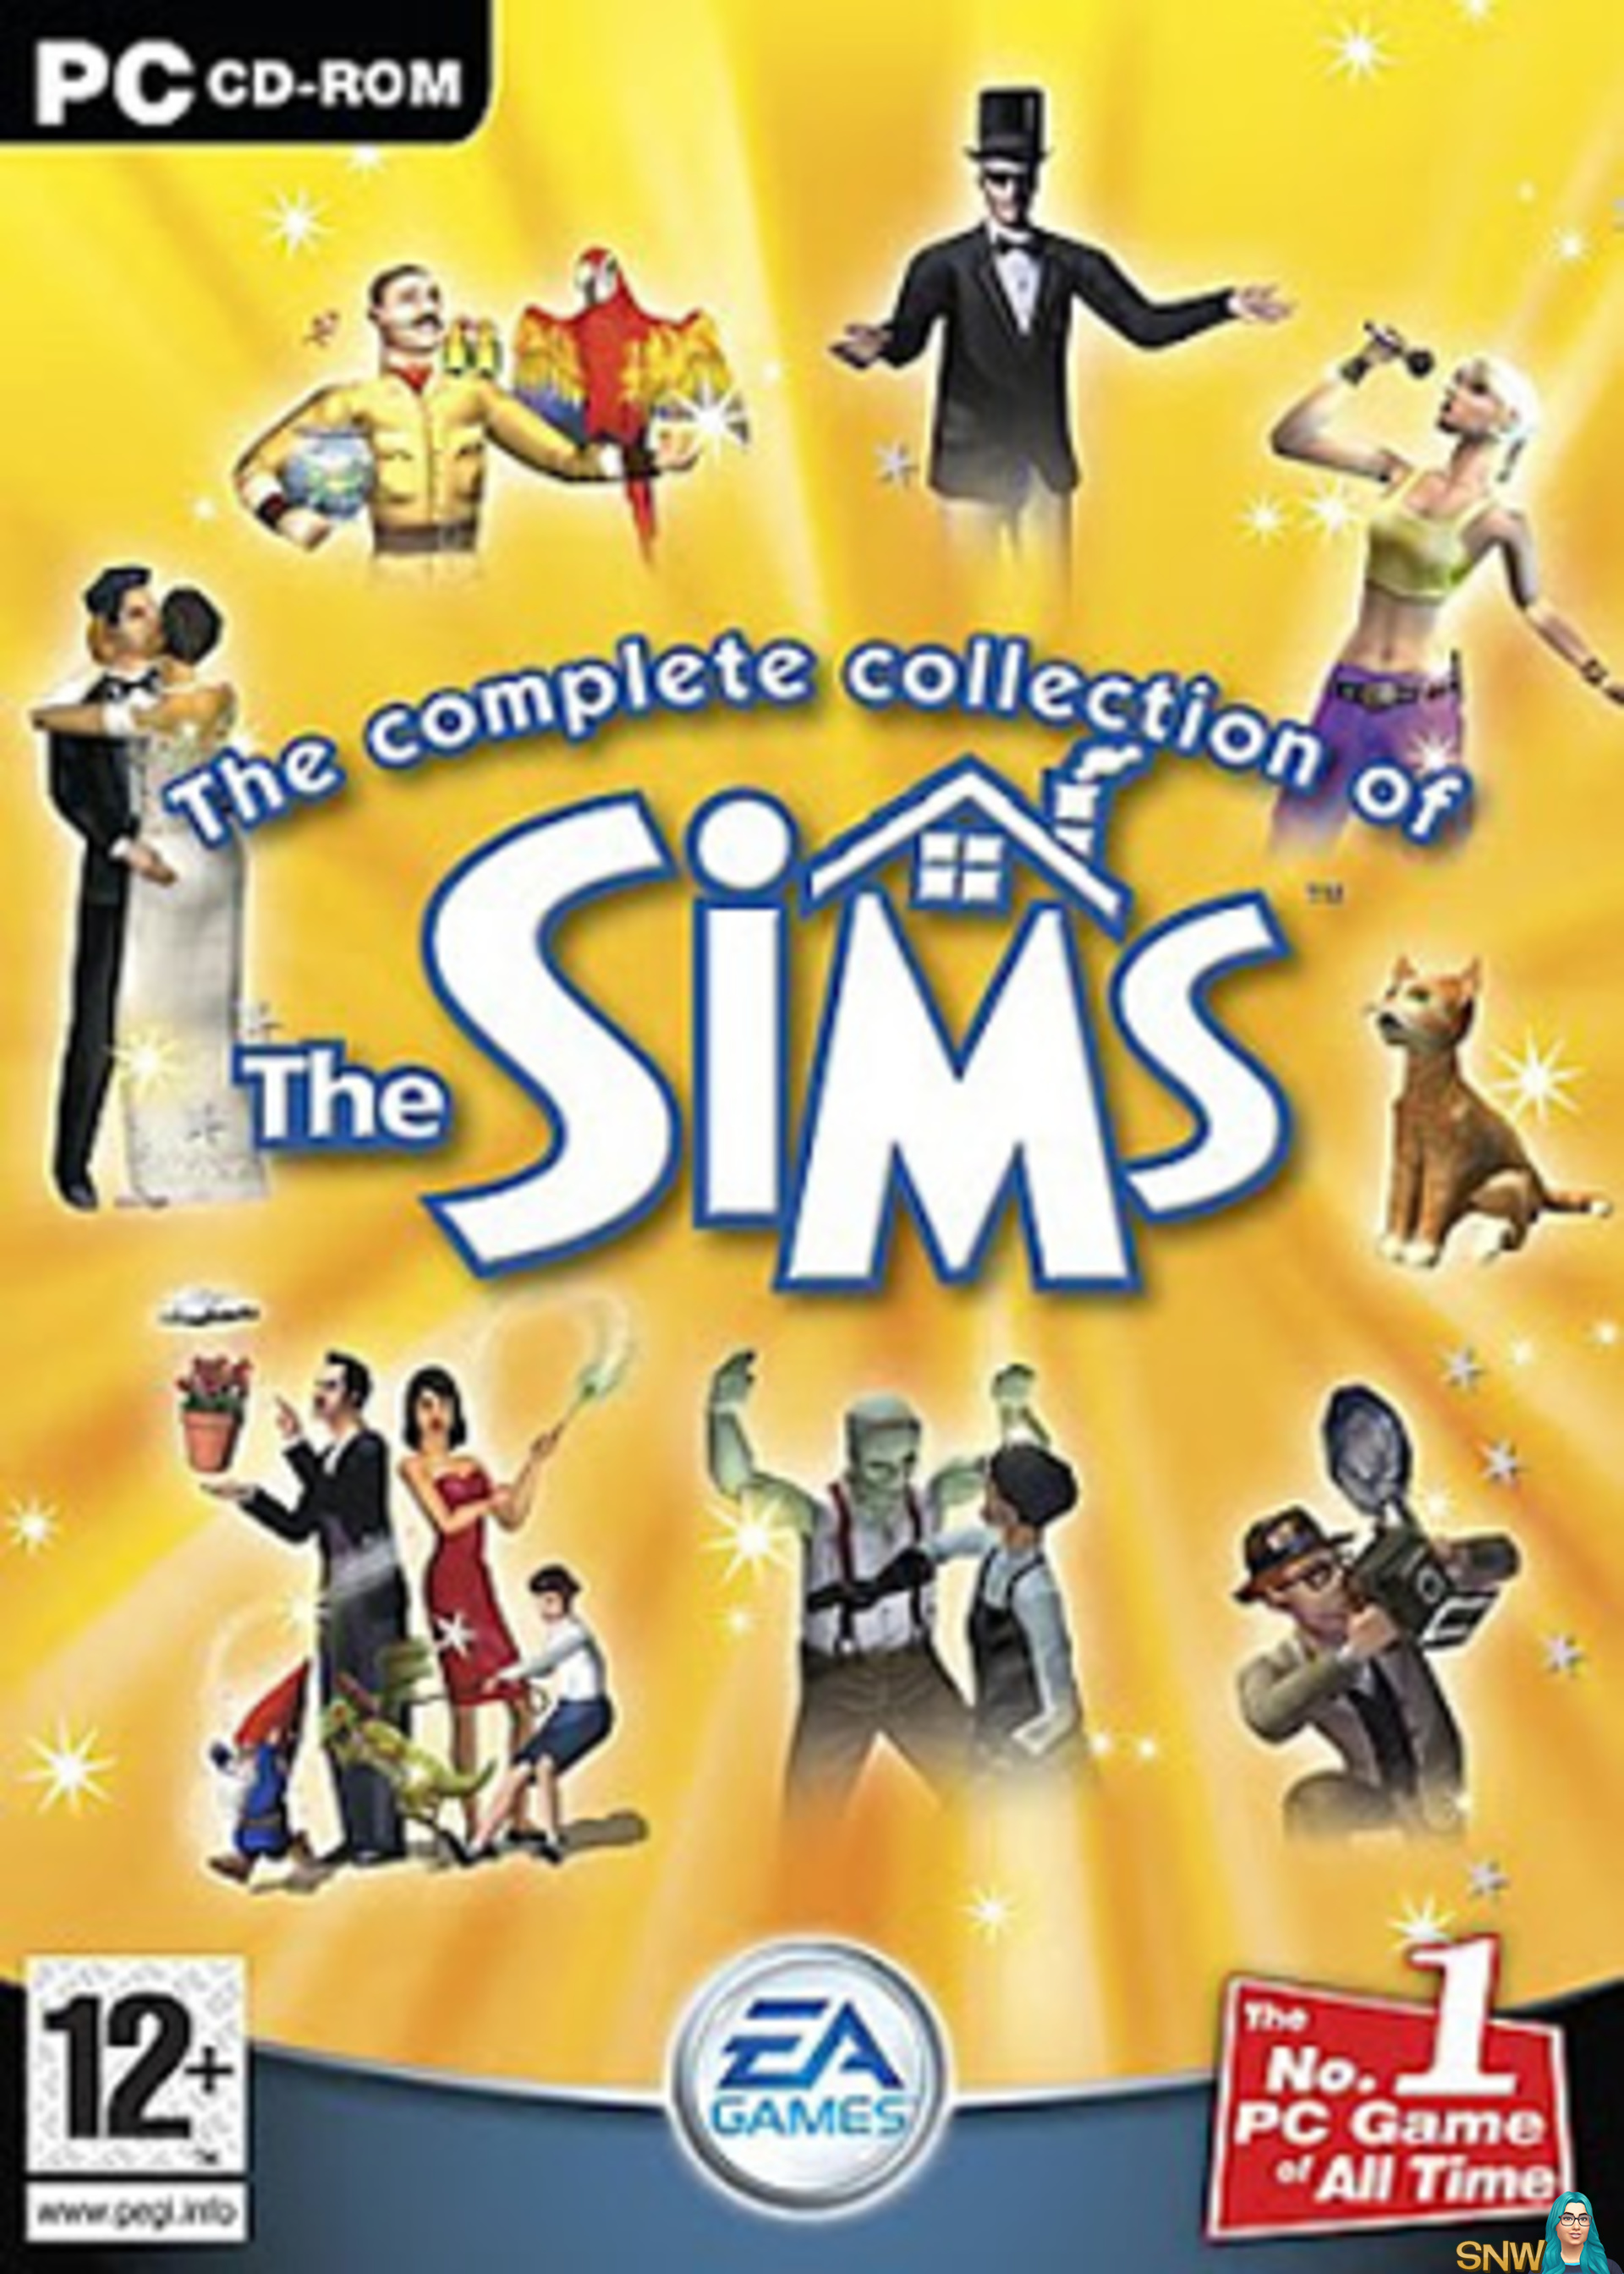 sims 3 complete collection download pirate bay